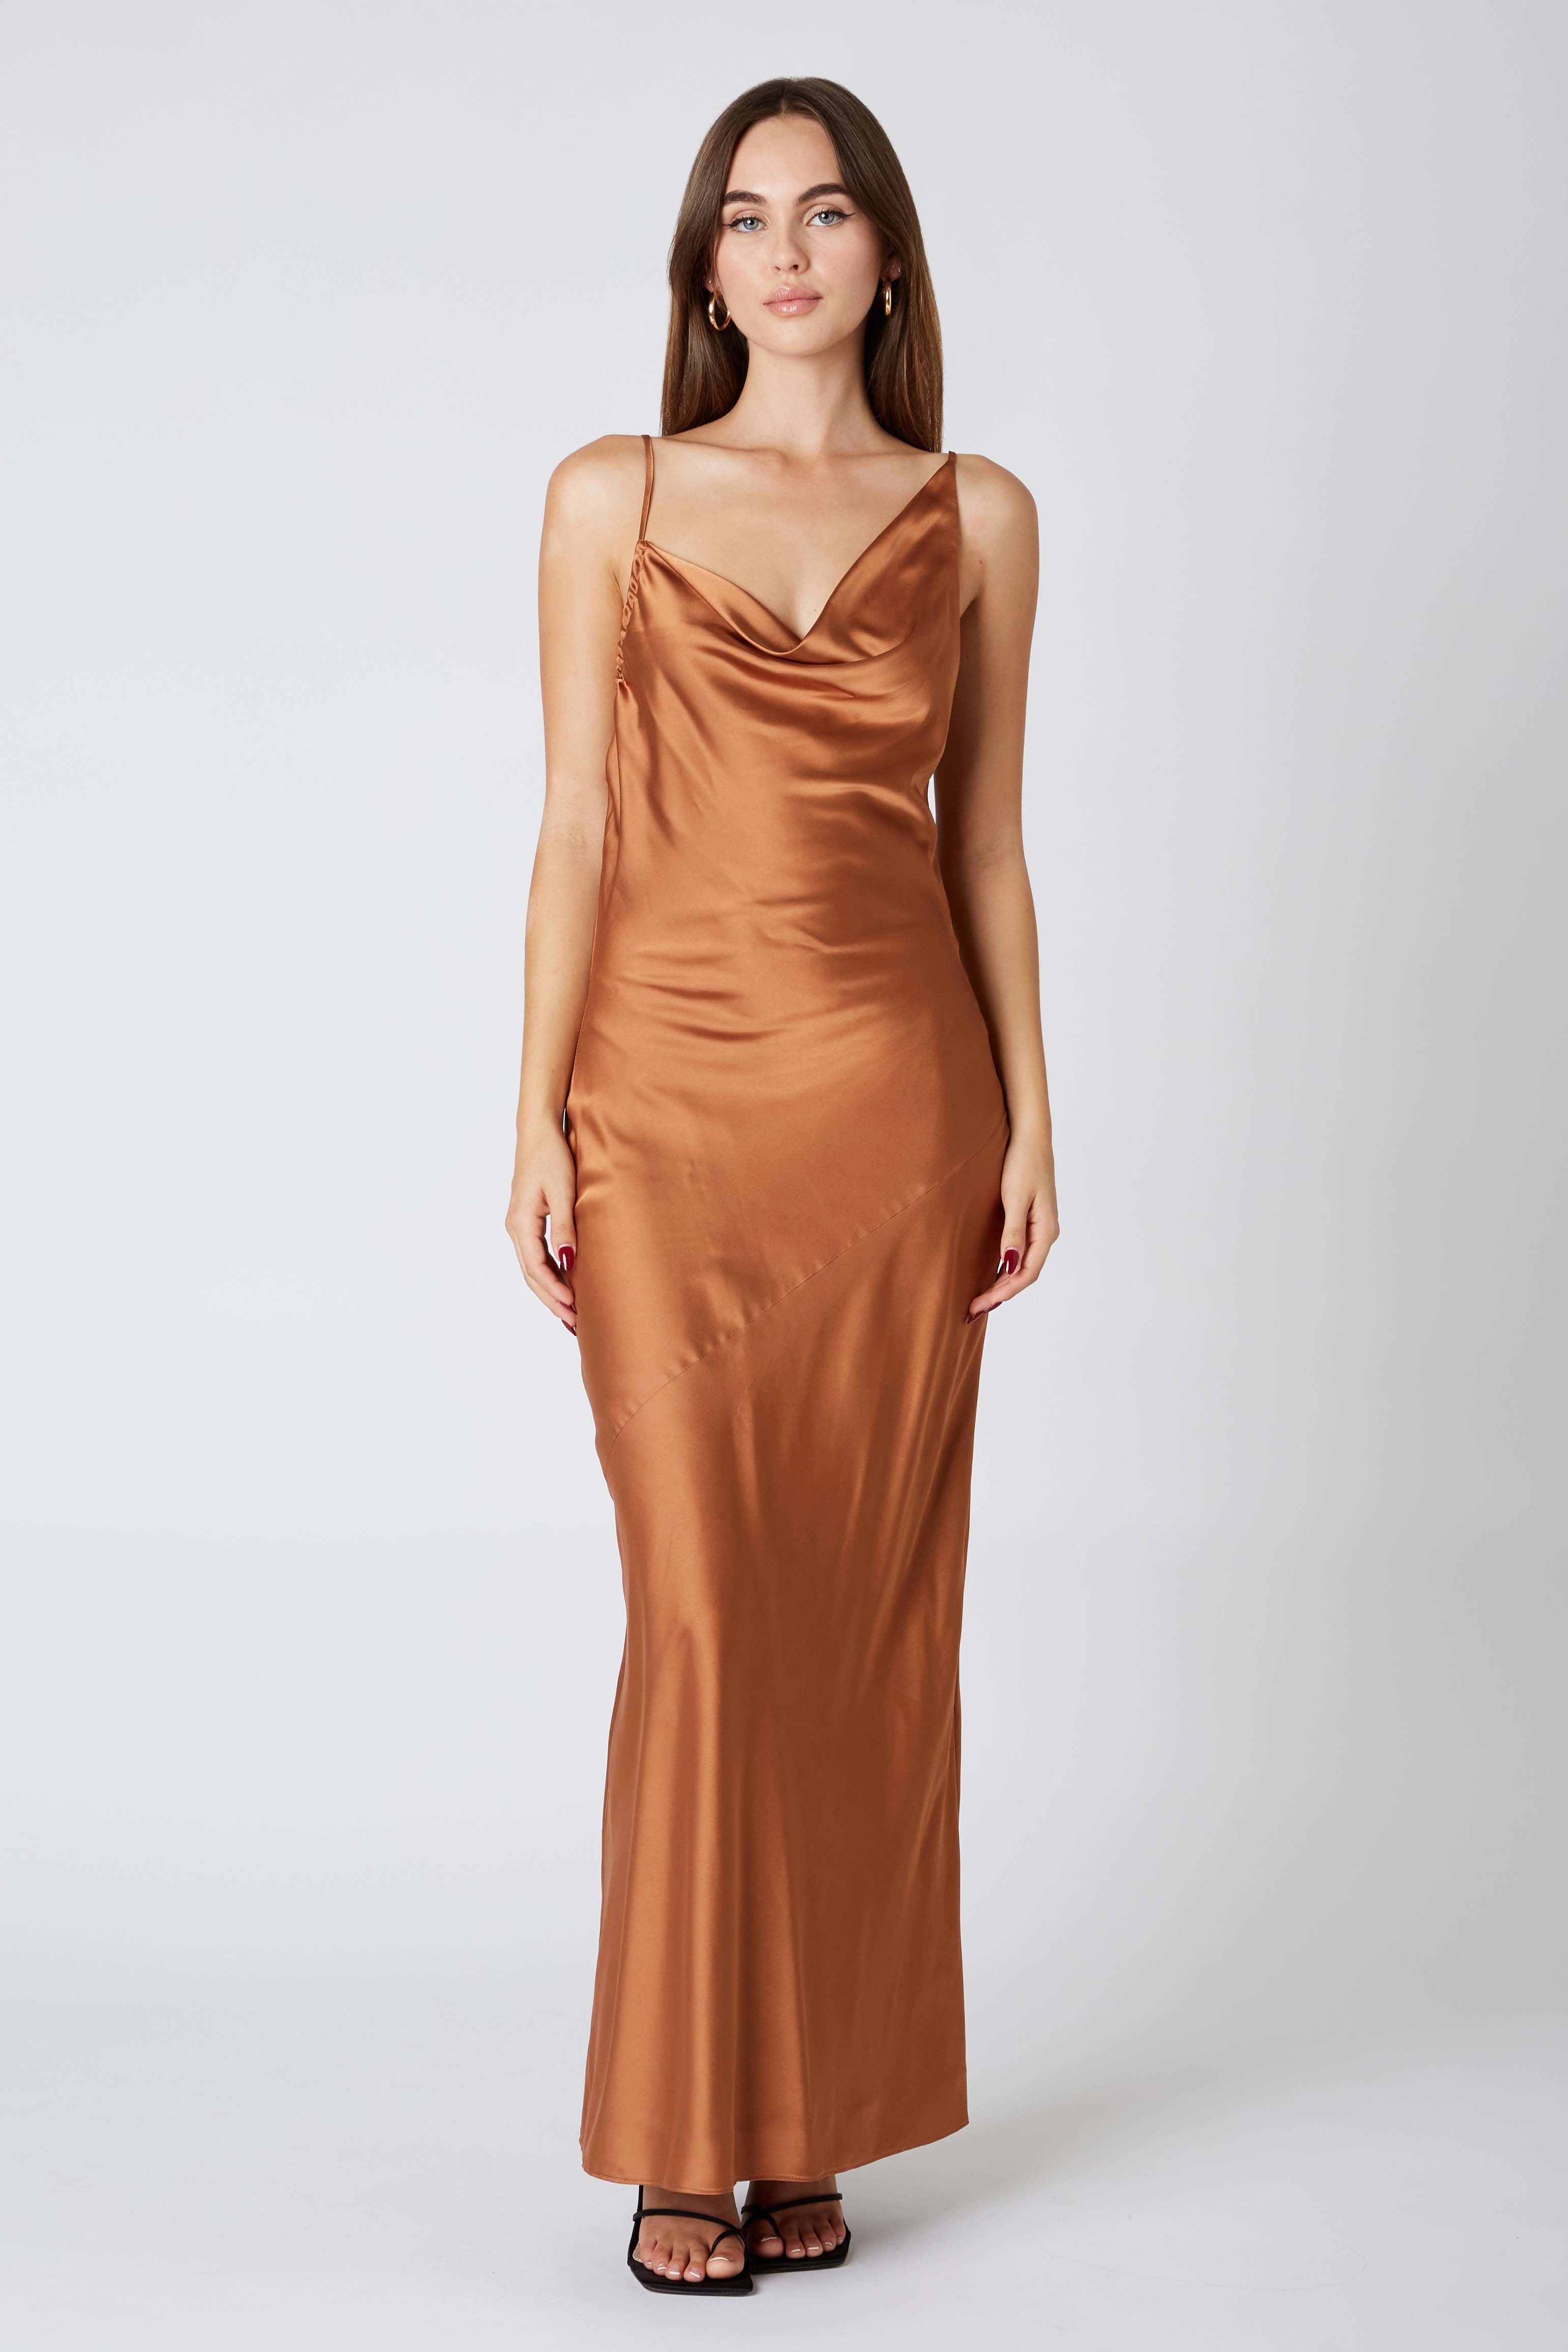 Cowlback Satin Maxi Dress in Nutmeg Front View